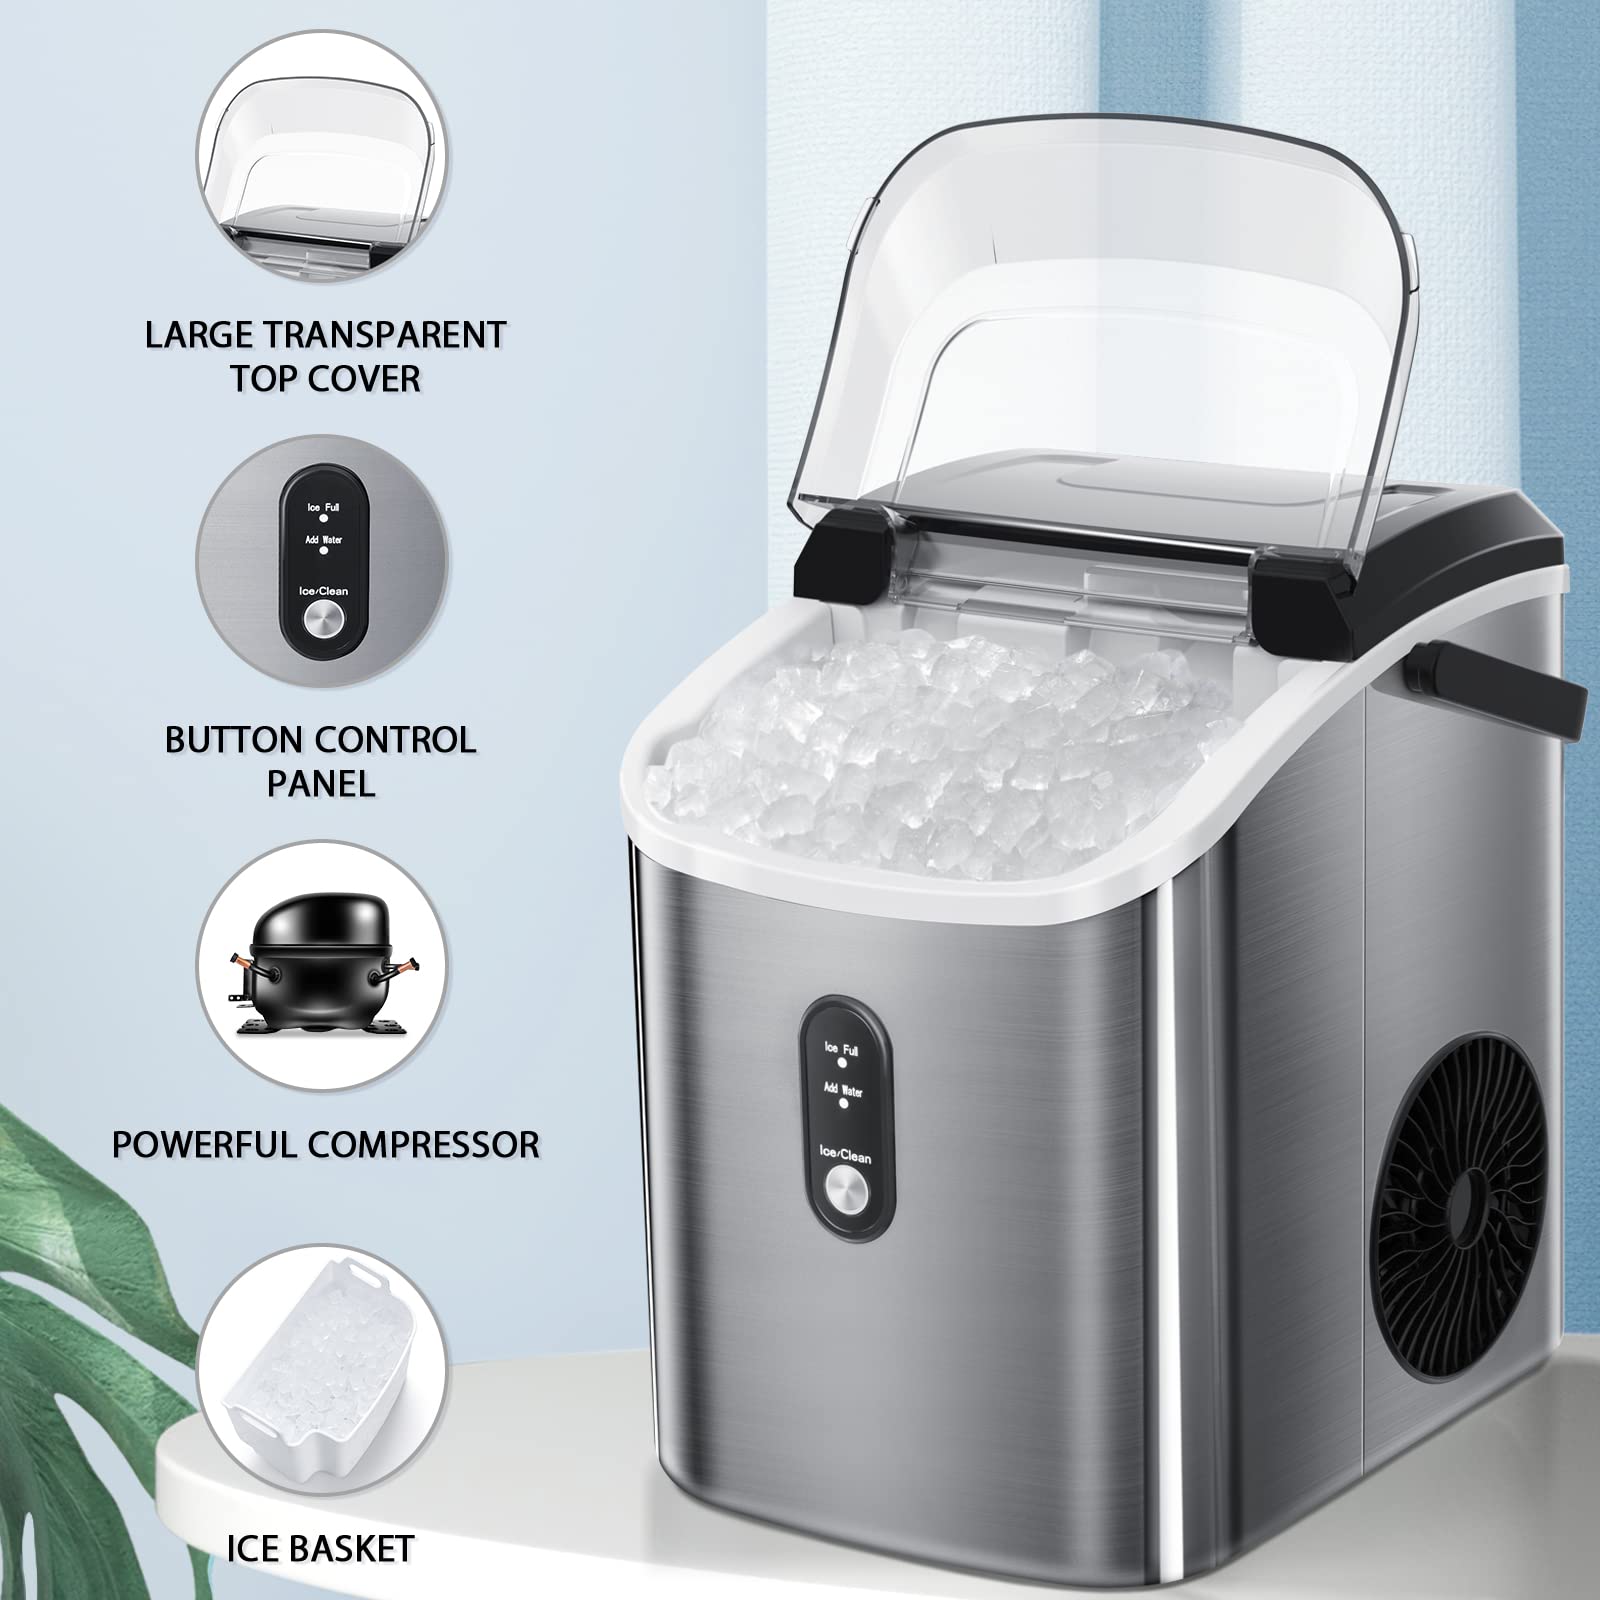 R.W.FLAME 44 lb. lb. Daily Production Nugget Countertop Ice Maker with Self-Cleaning Function Finish: Green Z5820BN-GREEN-SZ